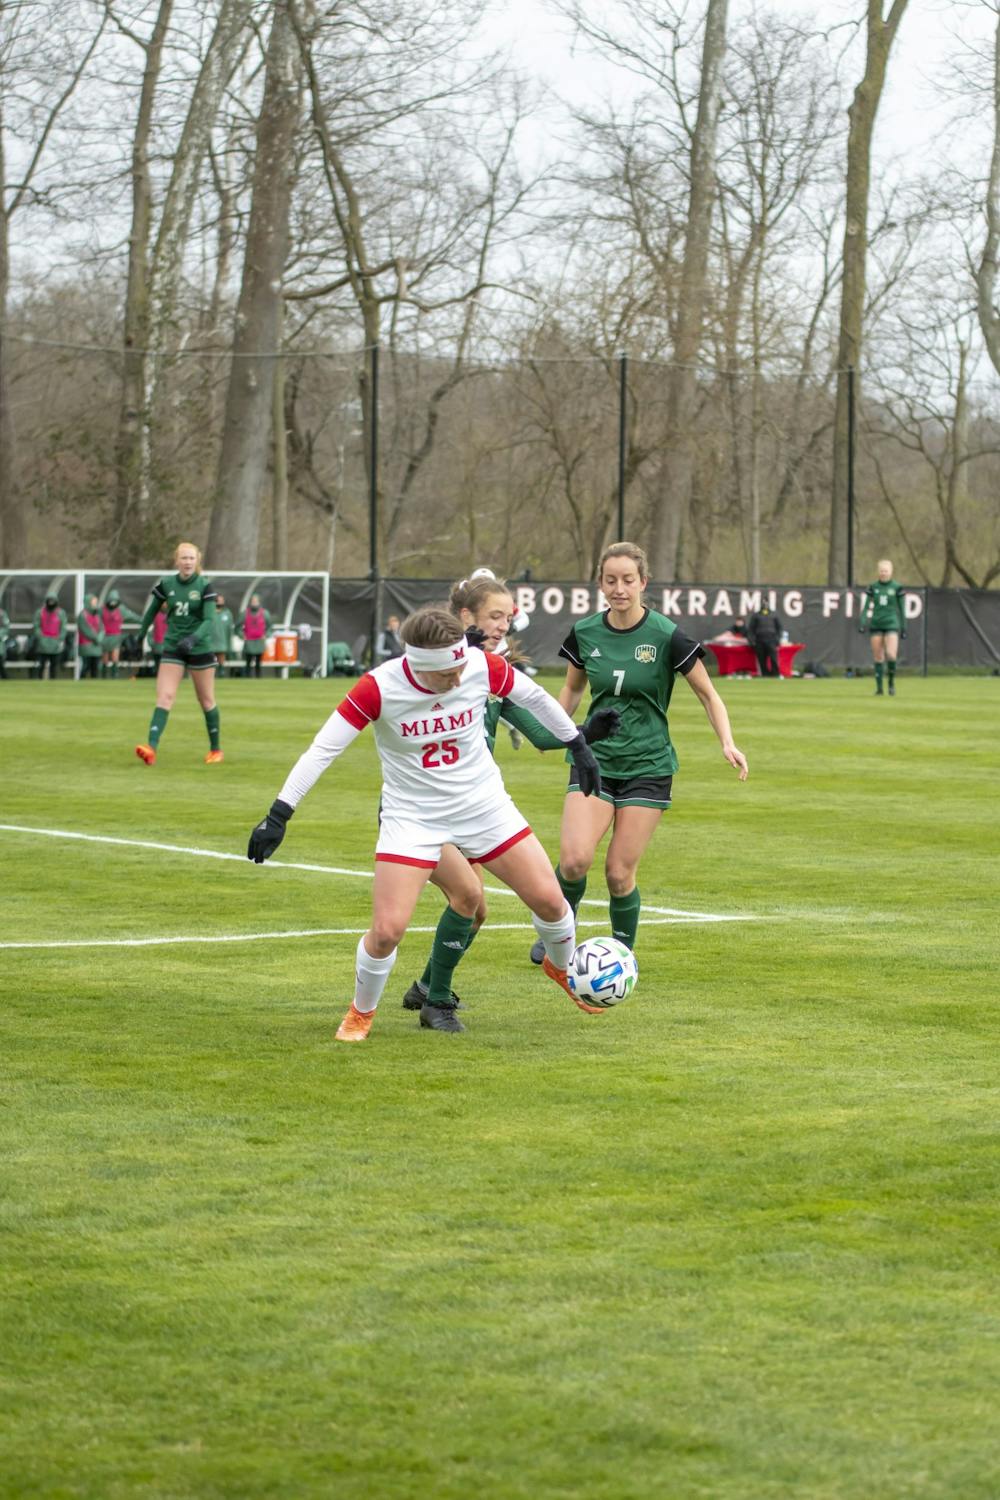 Then-Junior forward Christina DeMarco controls the ball in an April 1 matchup vs. Ohio University. The senior scored the winning goal in Miami's 2-1 win over Western Michigan on Senior Day.